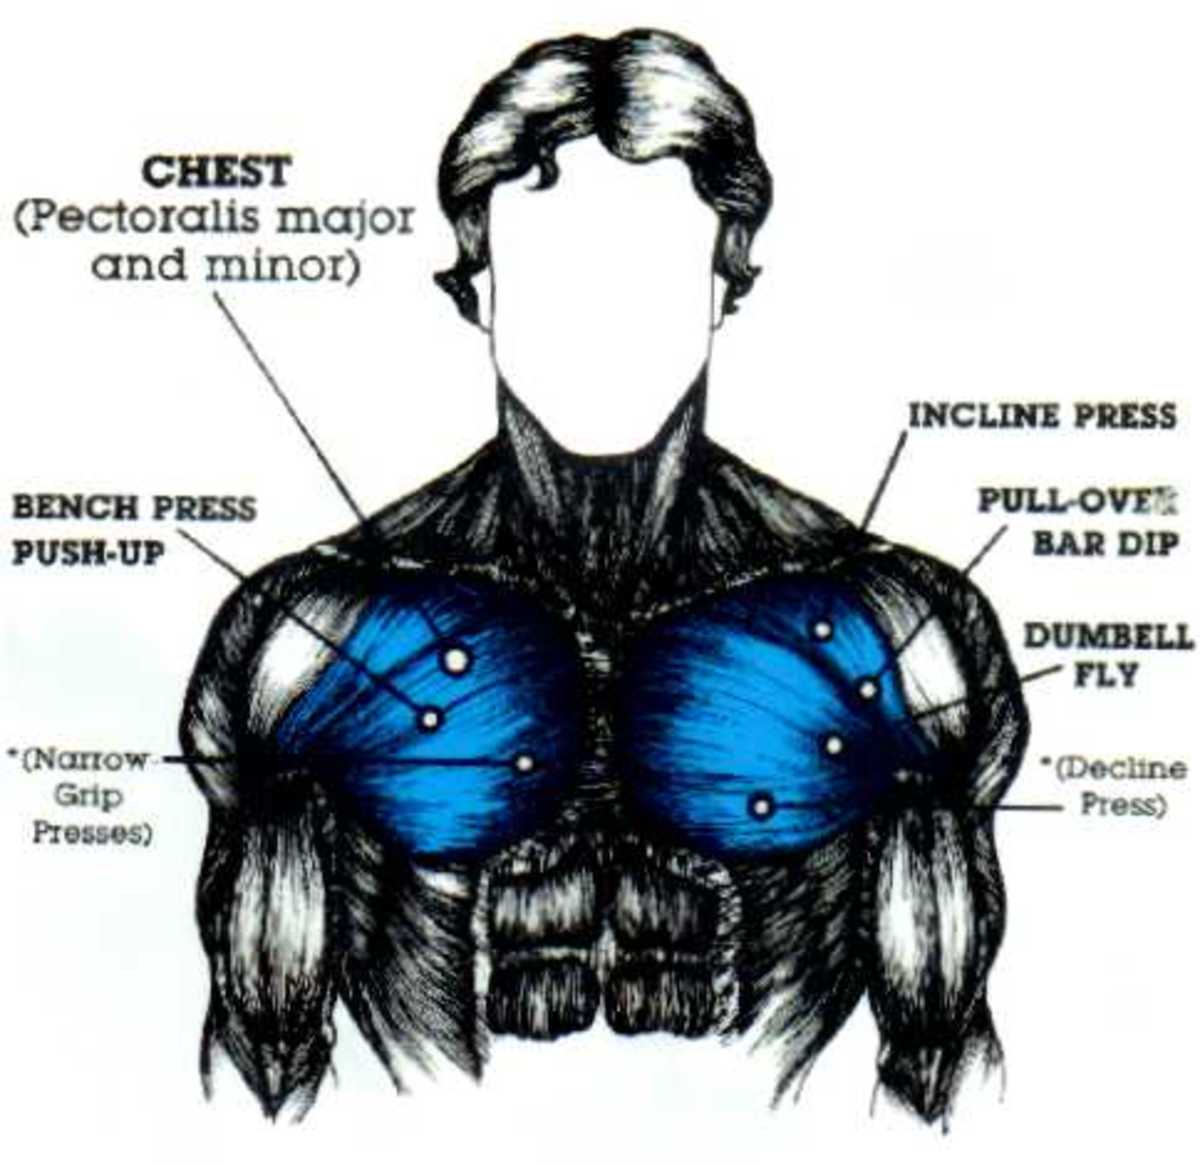 Diagram of chest muscles